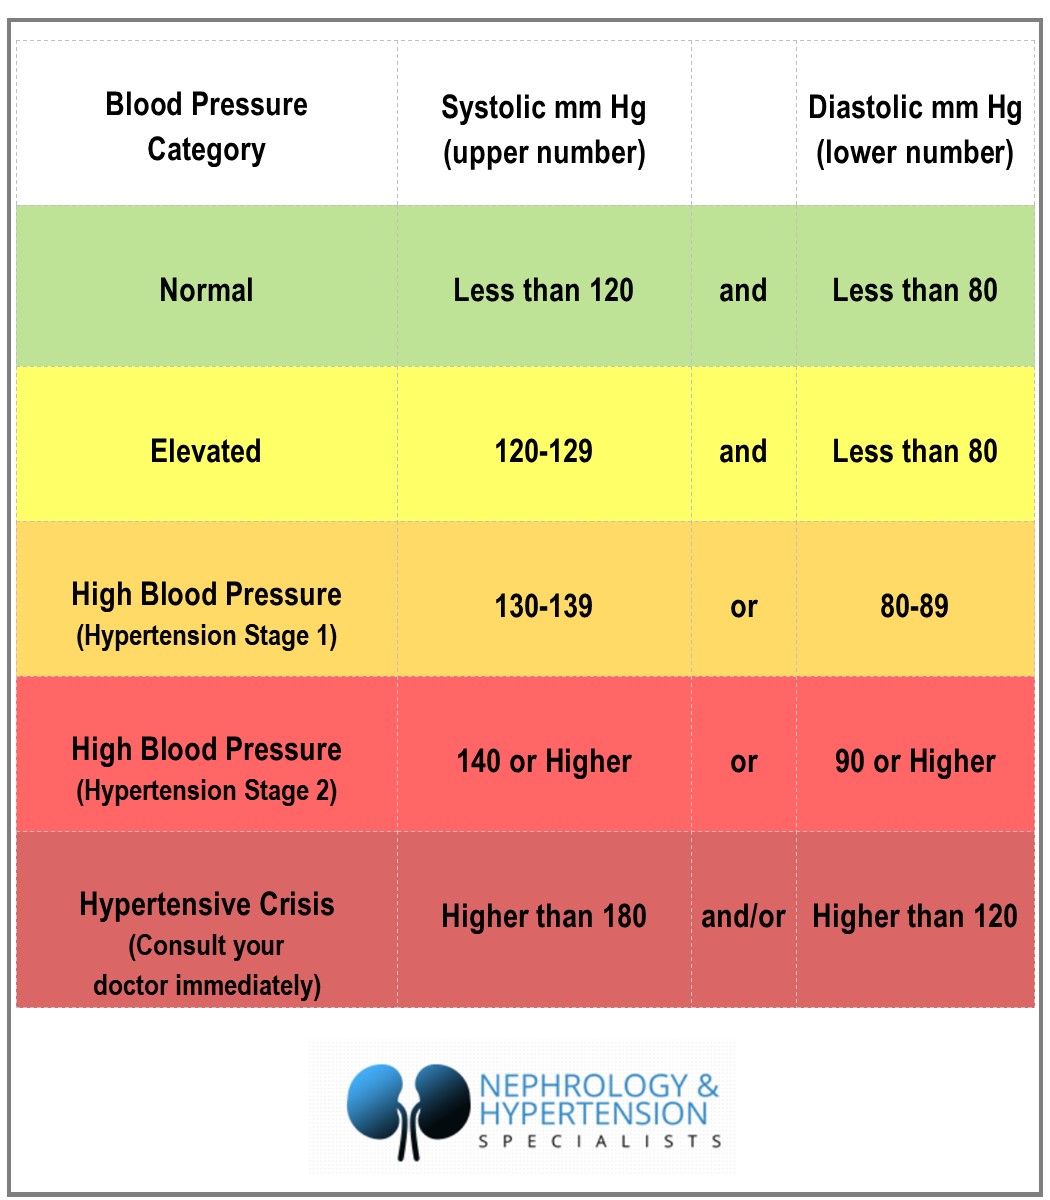 Blood Pressure - Nephrology and Hypertension Specialists